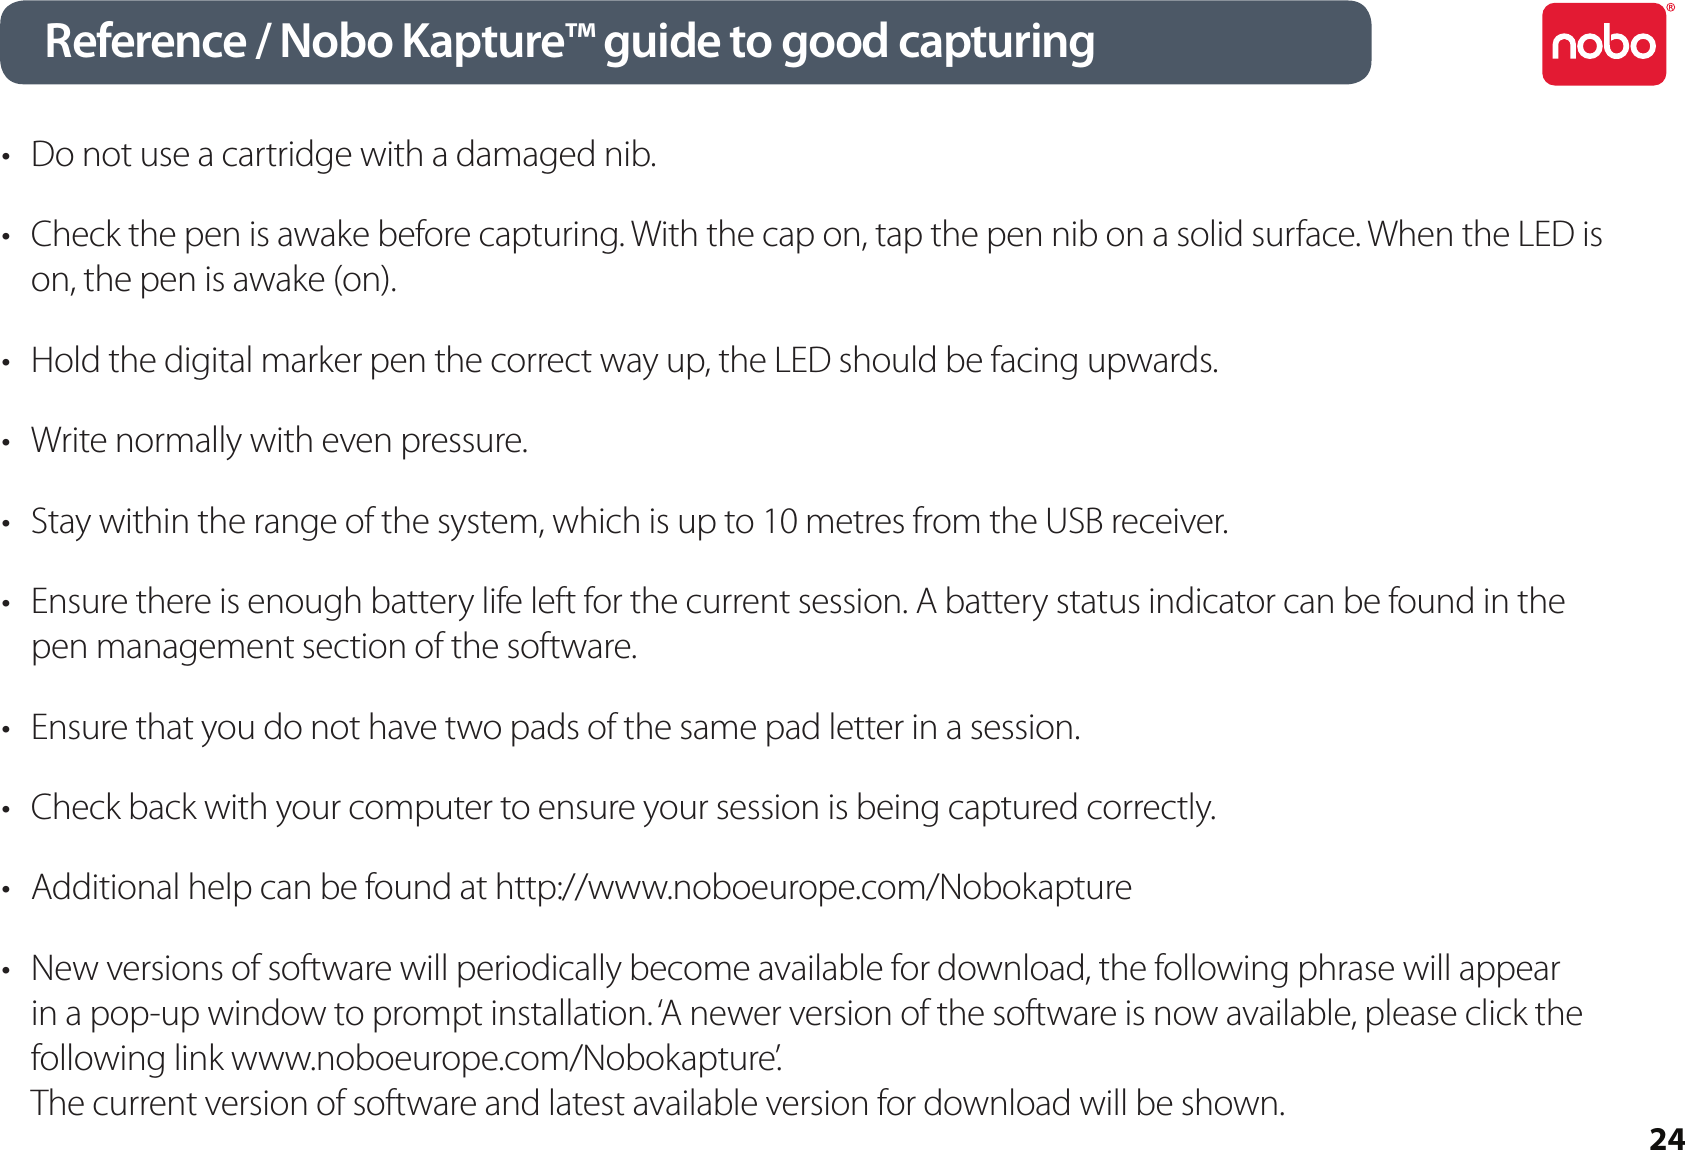 24Reference / Nobo Kapture™ guide to good capturingDo not use a cartridge with a damaged nib.•Check the pen is awake before capturing. With the cap on, tap the pen nib on a solid surface. When the LED is •on, the pen is awake (on).Hold the digital marker pen the correct way up, the LED should be facing upwards.•Write normally with even pressure.•Stay within the range of the system, which is up to 10 metres from the USB receiver.•Ensure there is enough battery life left for the current session. A battery status indicator can be found in the •pen management section of the software.Ensure that you do not have two pads of the same pad letter in a session.•Check back with your computer to ensure your session is being captured correctly.•Additional help can be found at • http://www.noboeurope.com/NobokaptureNew versions of software will periodically become available for download, the following phrase will appear •in a pop-up window to prompt installation. ‘A newer version of the software is now available, please click the following link www.noboeurope.com/Nobokapture’. The current version of software and latest available version for download will be shown.